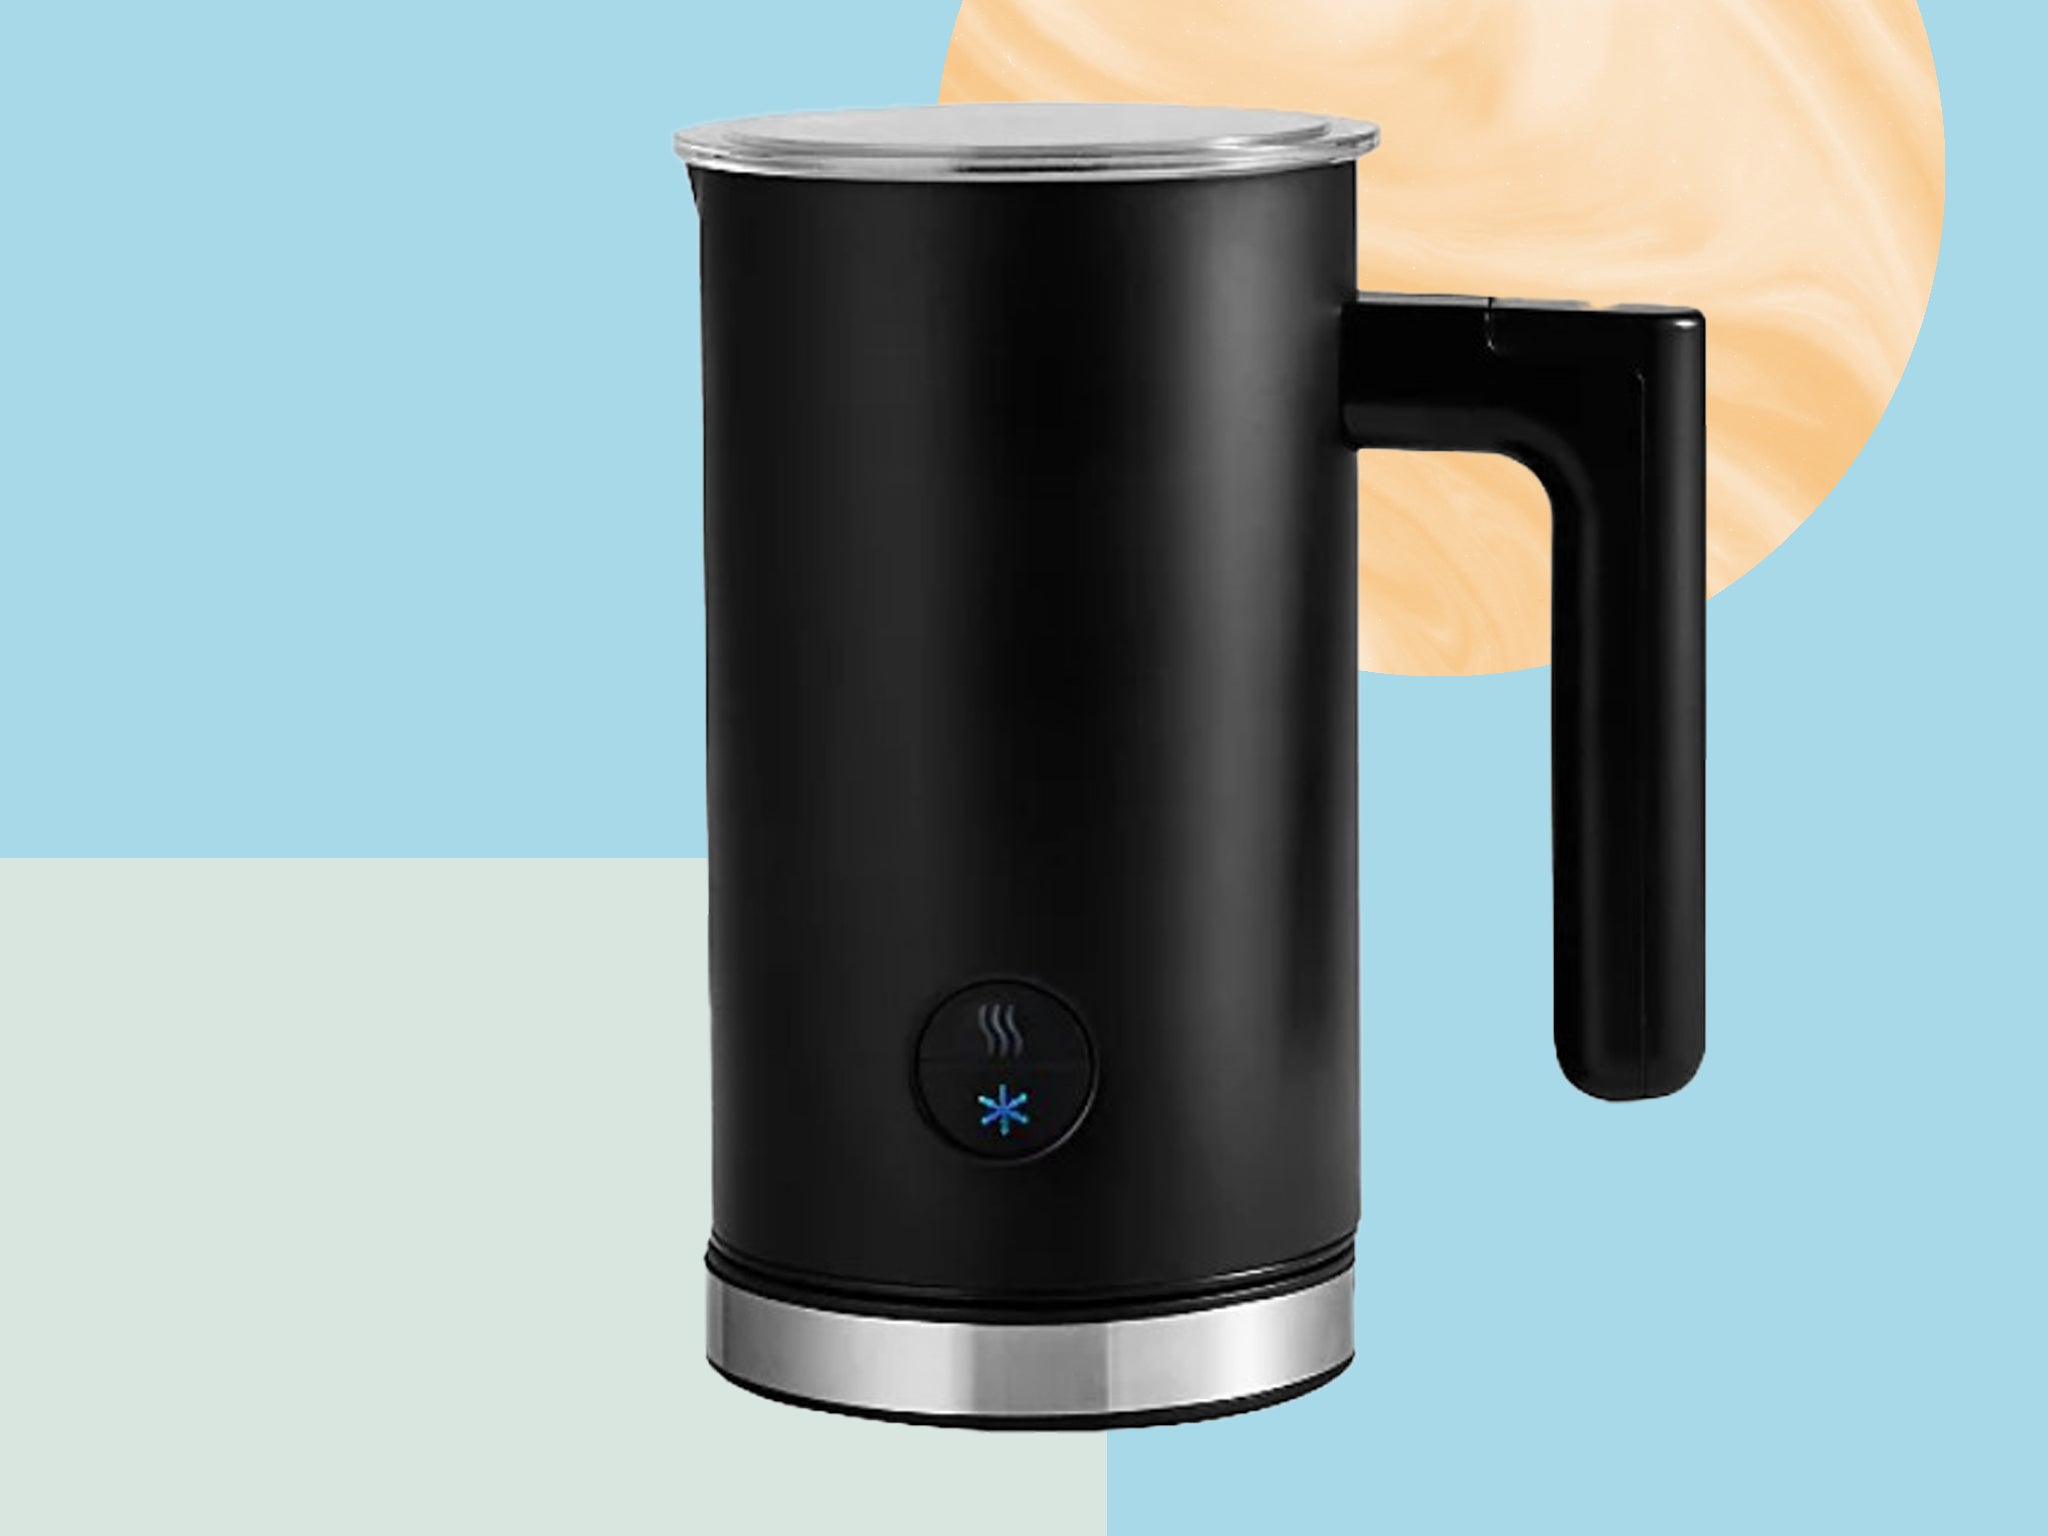 The budget-friendly frother has taken TikTok by storm